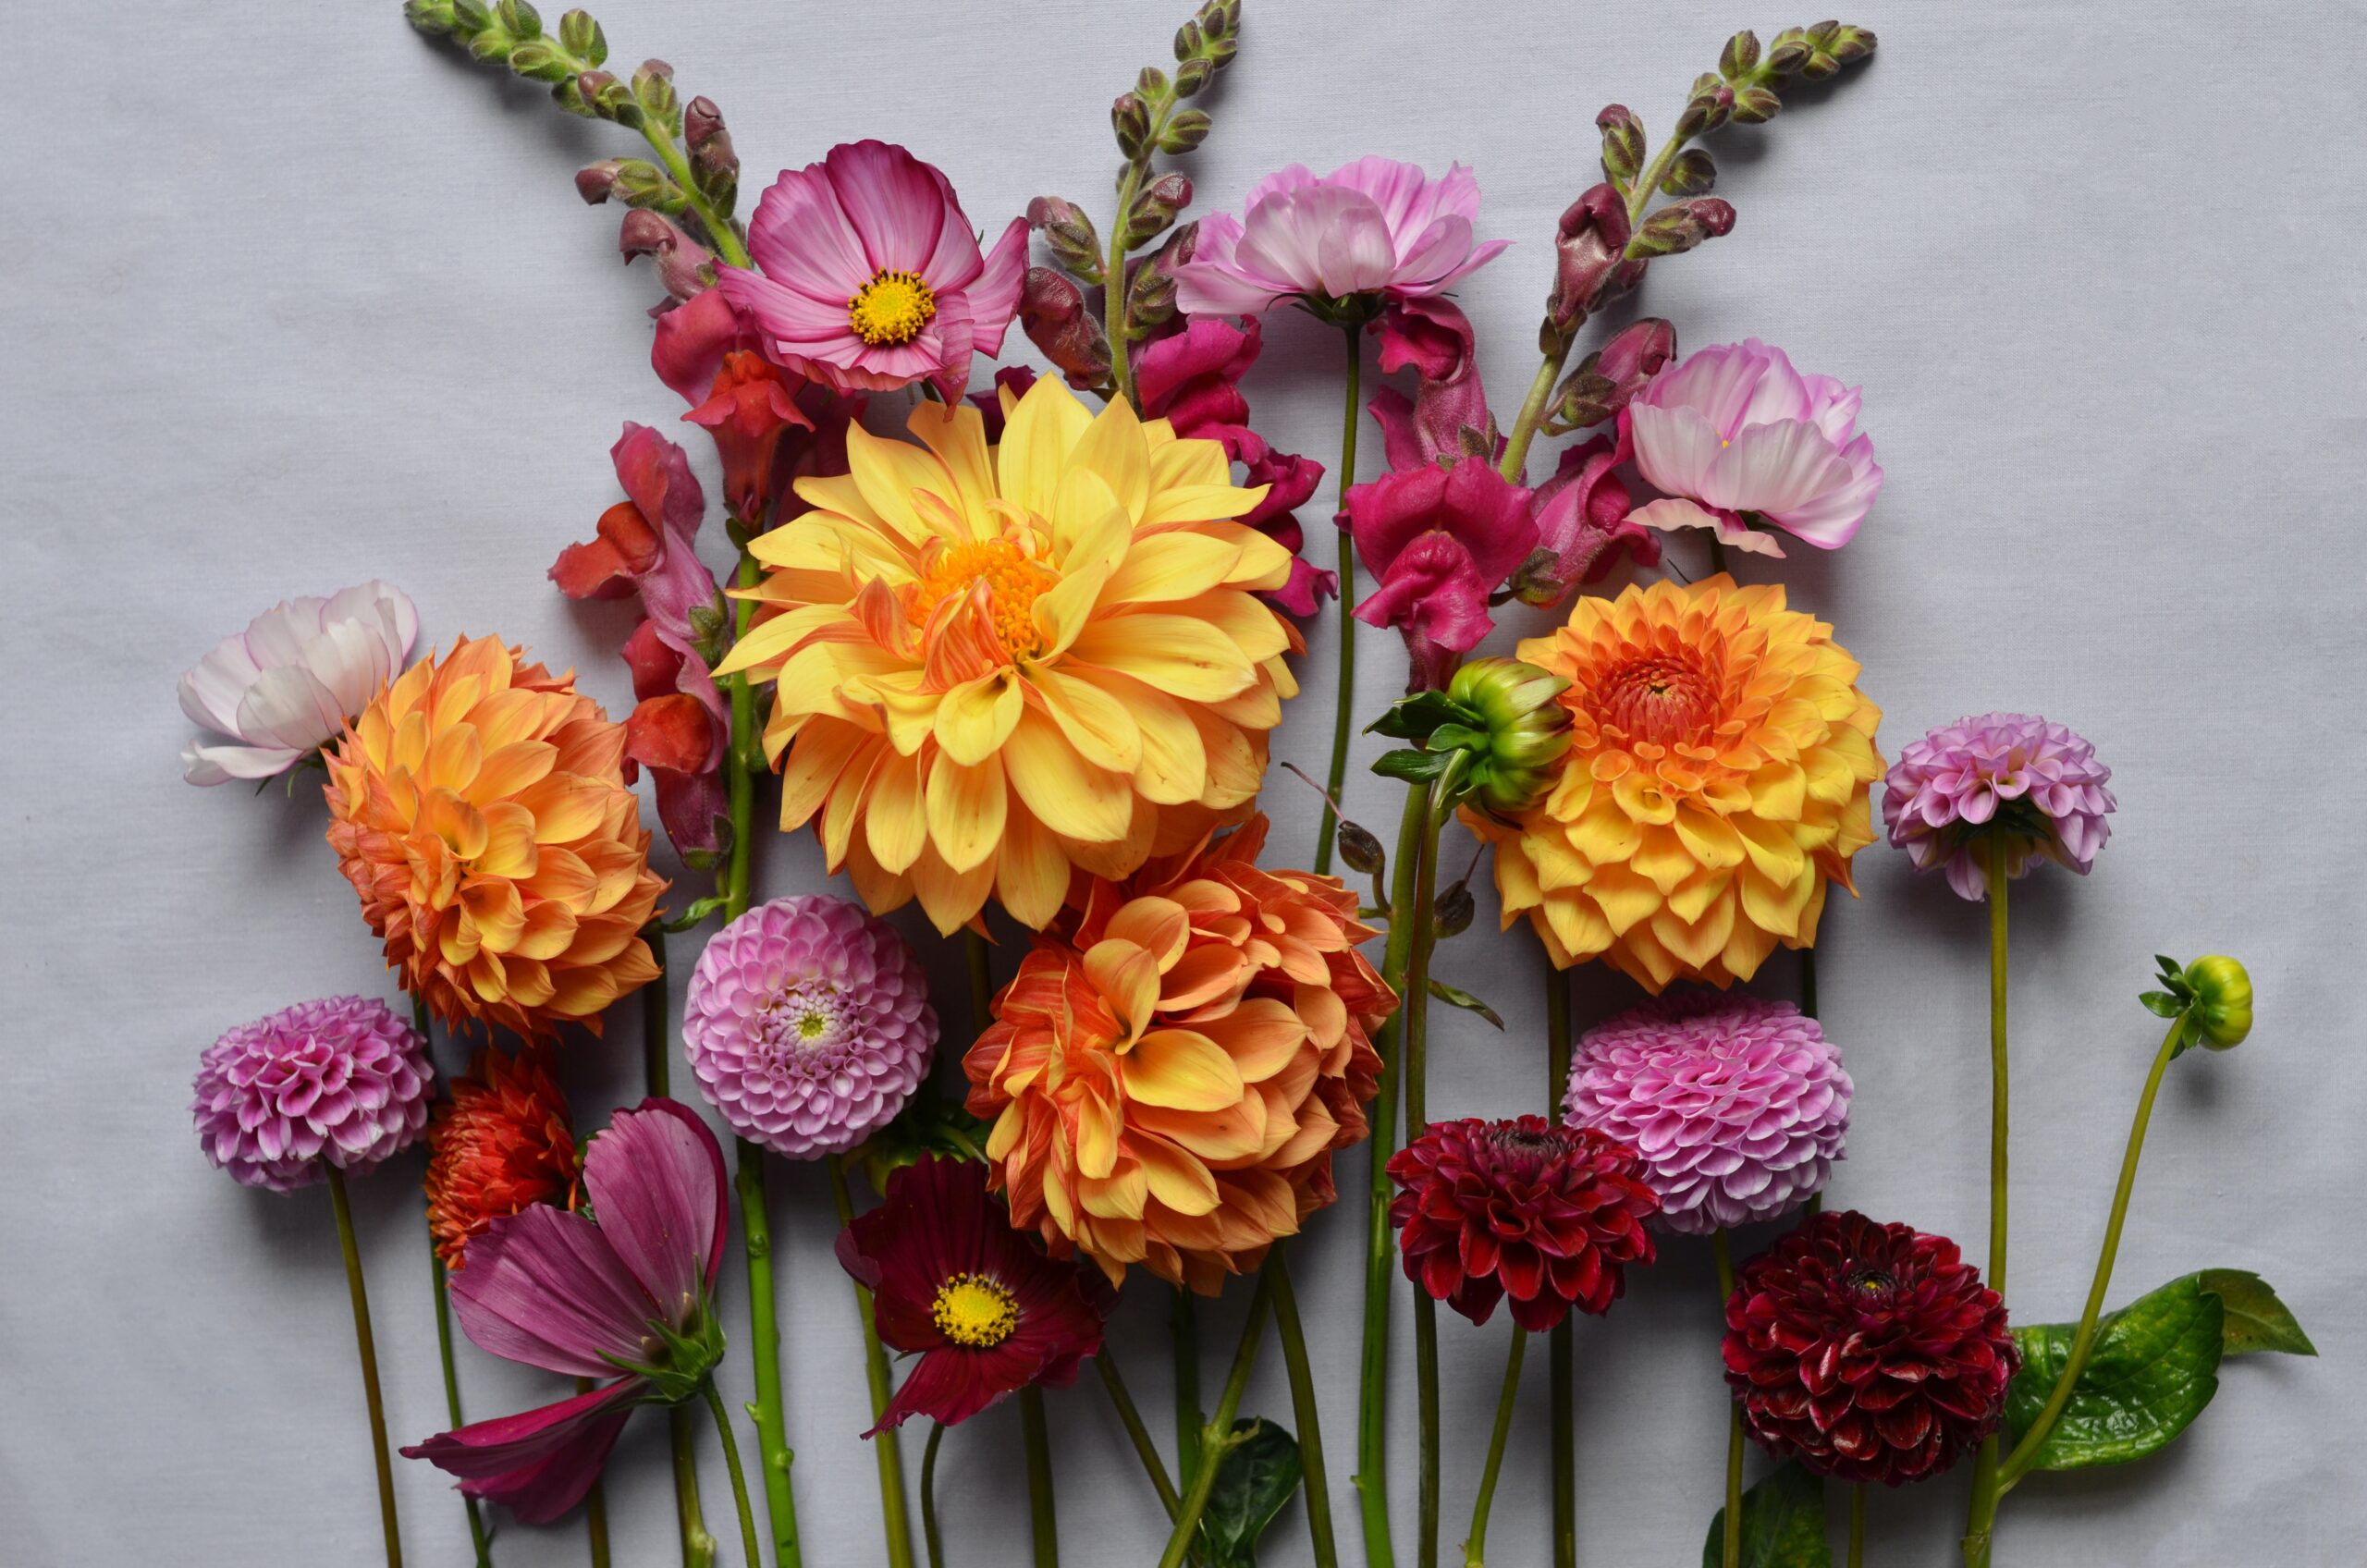 How to use flowers to lift your spirit